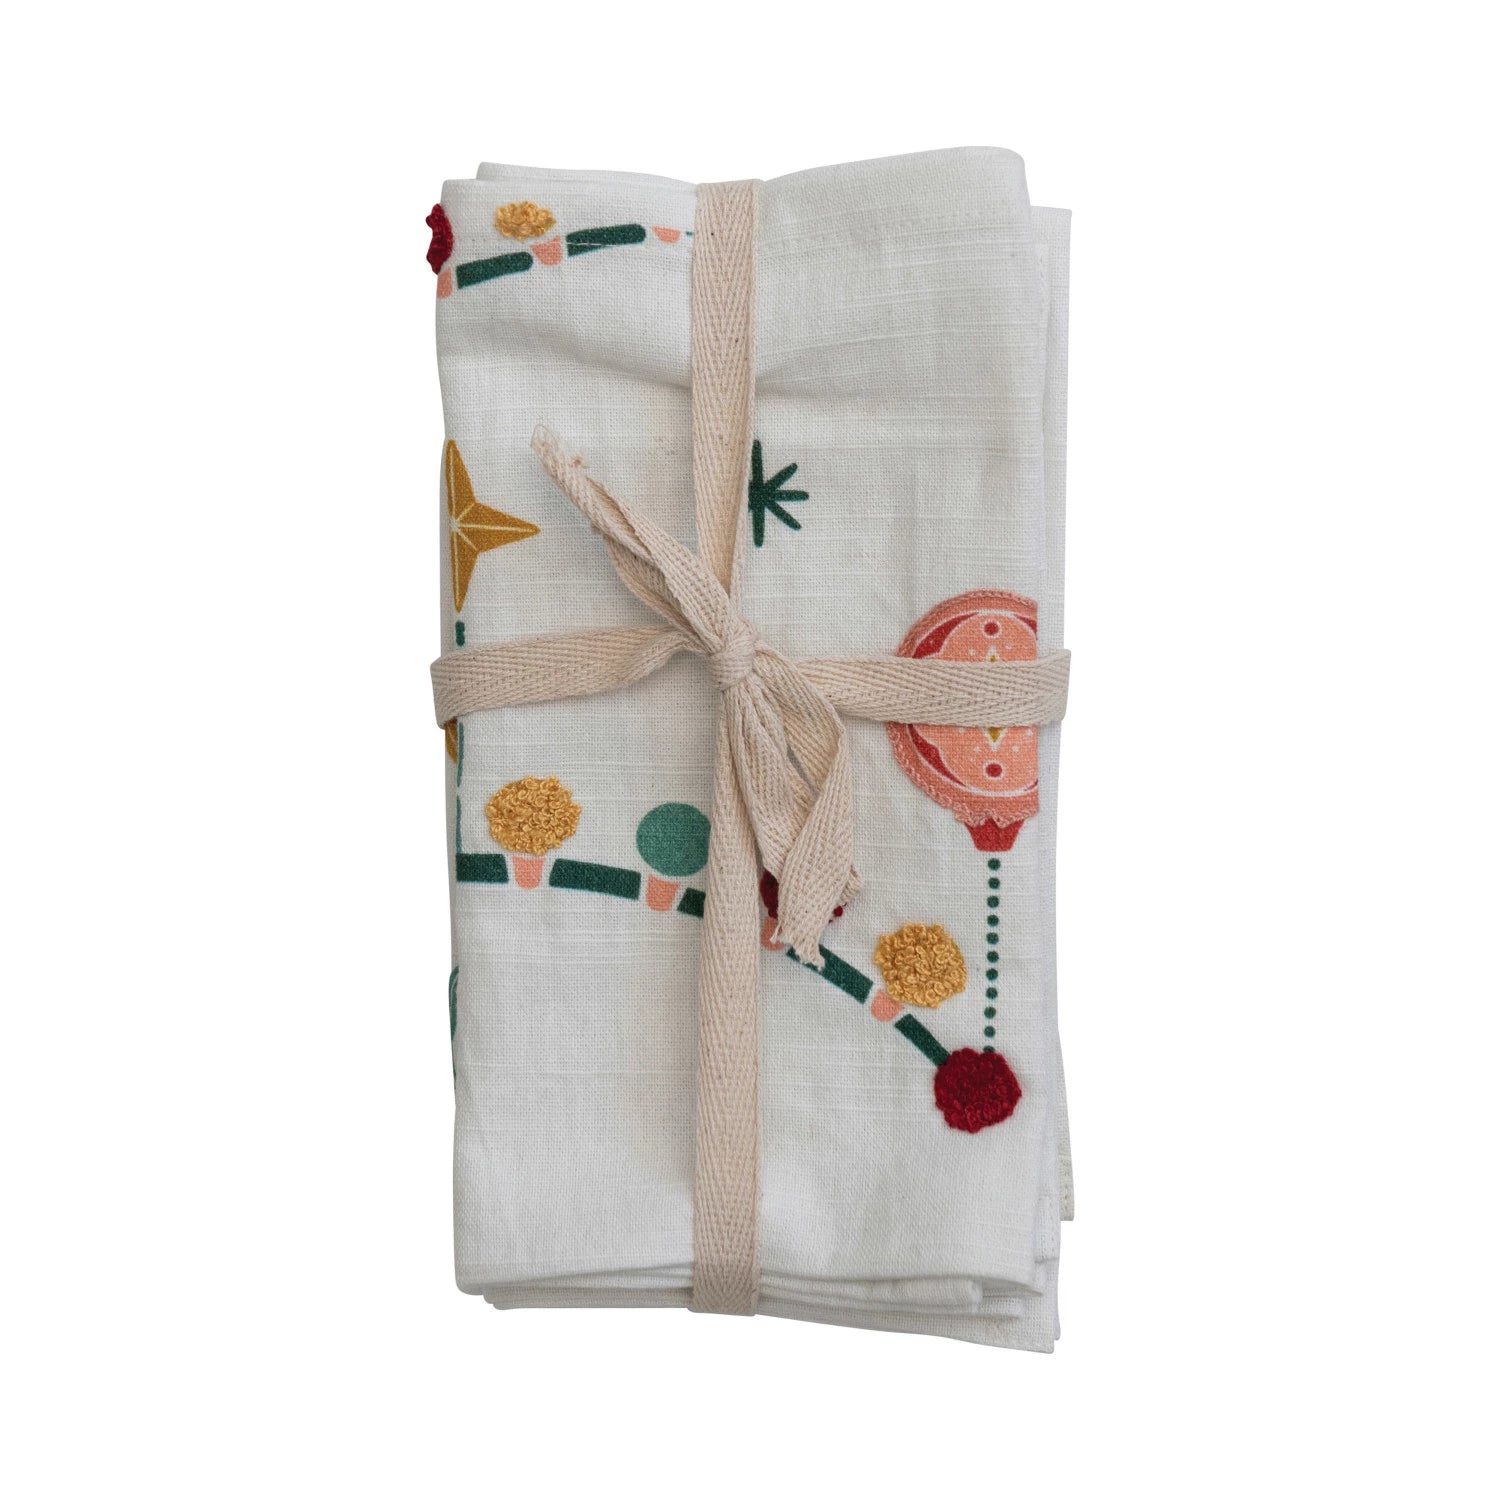 Cotton Printed Napkins with Embroidery, Set of 4